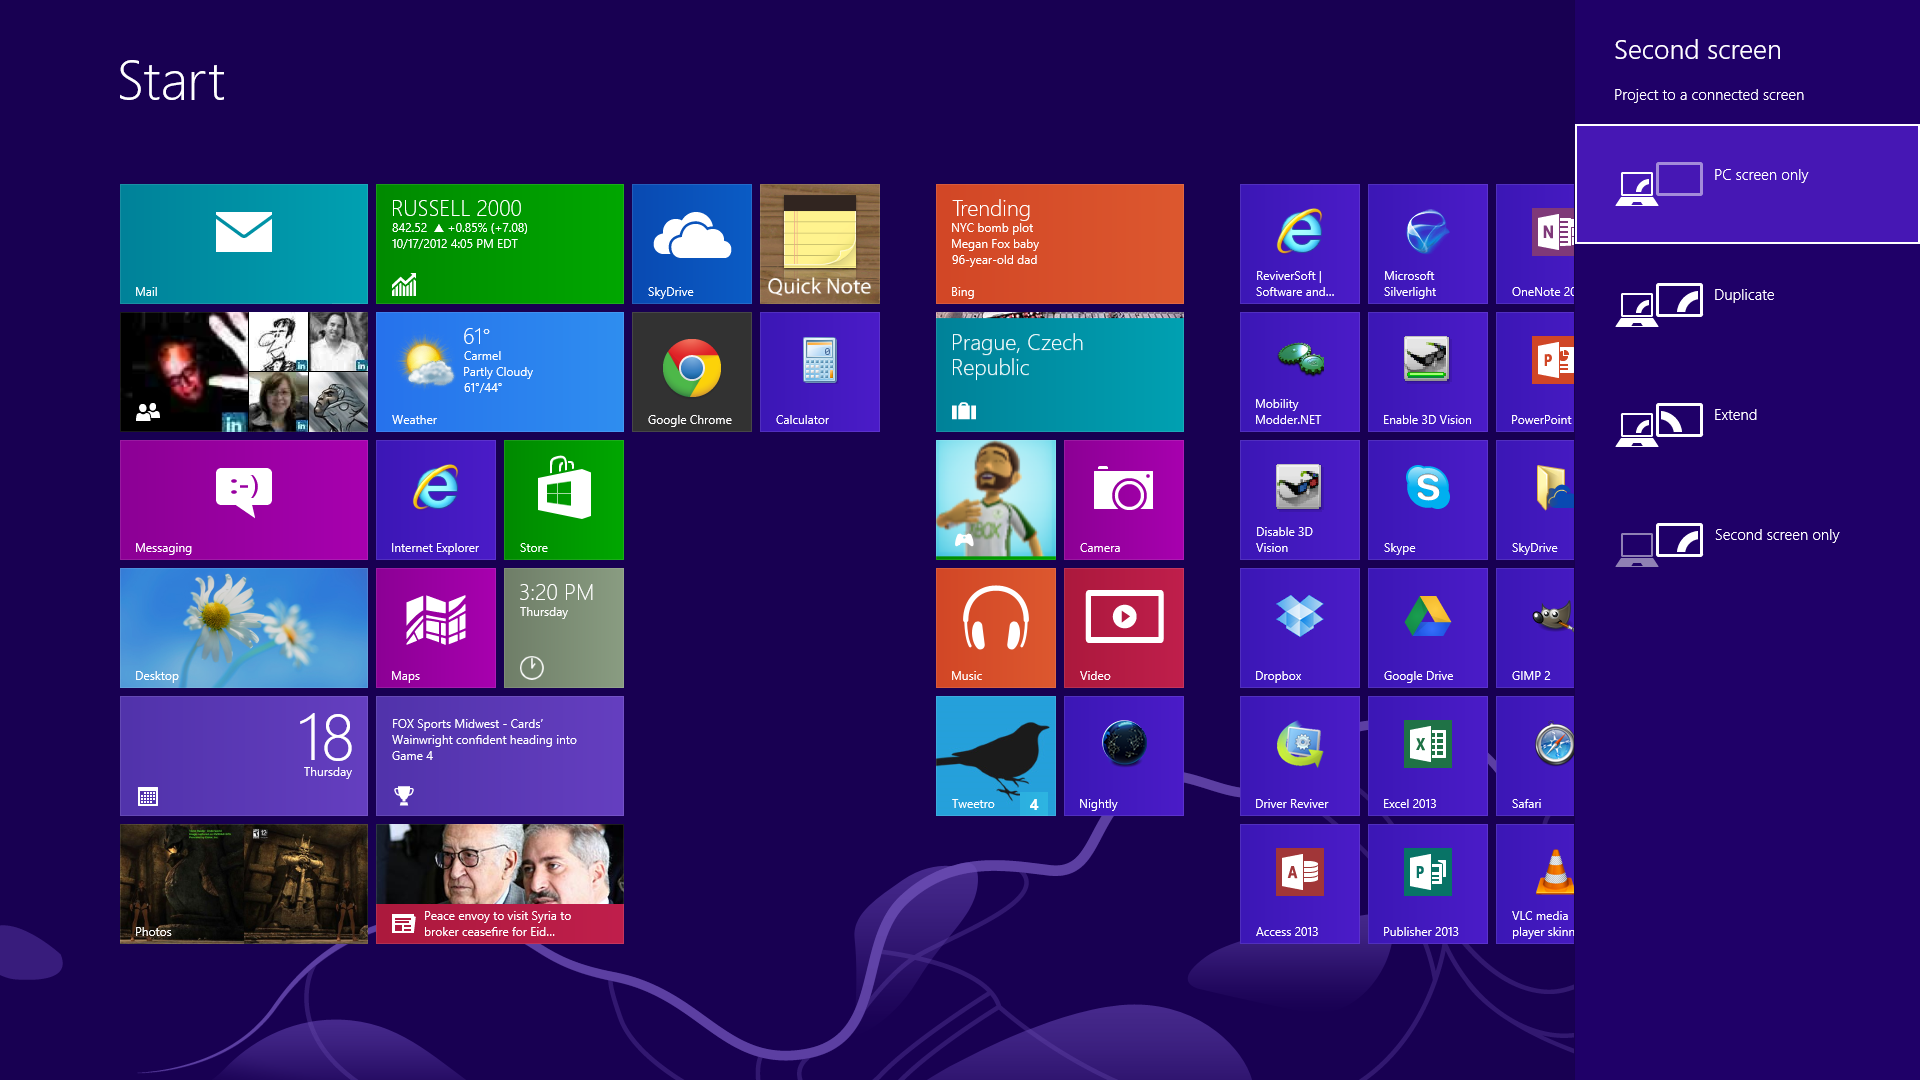 Connect to a Projector in Windows 8